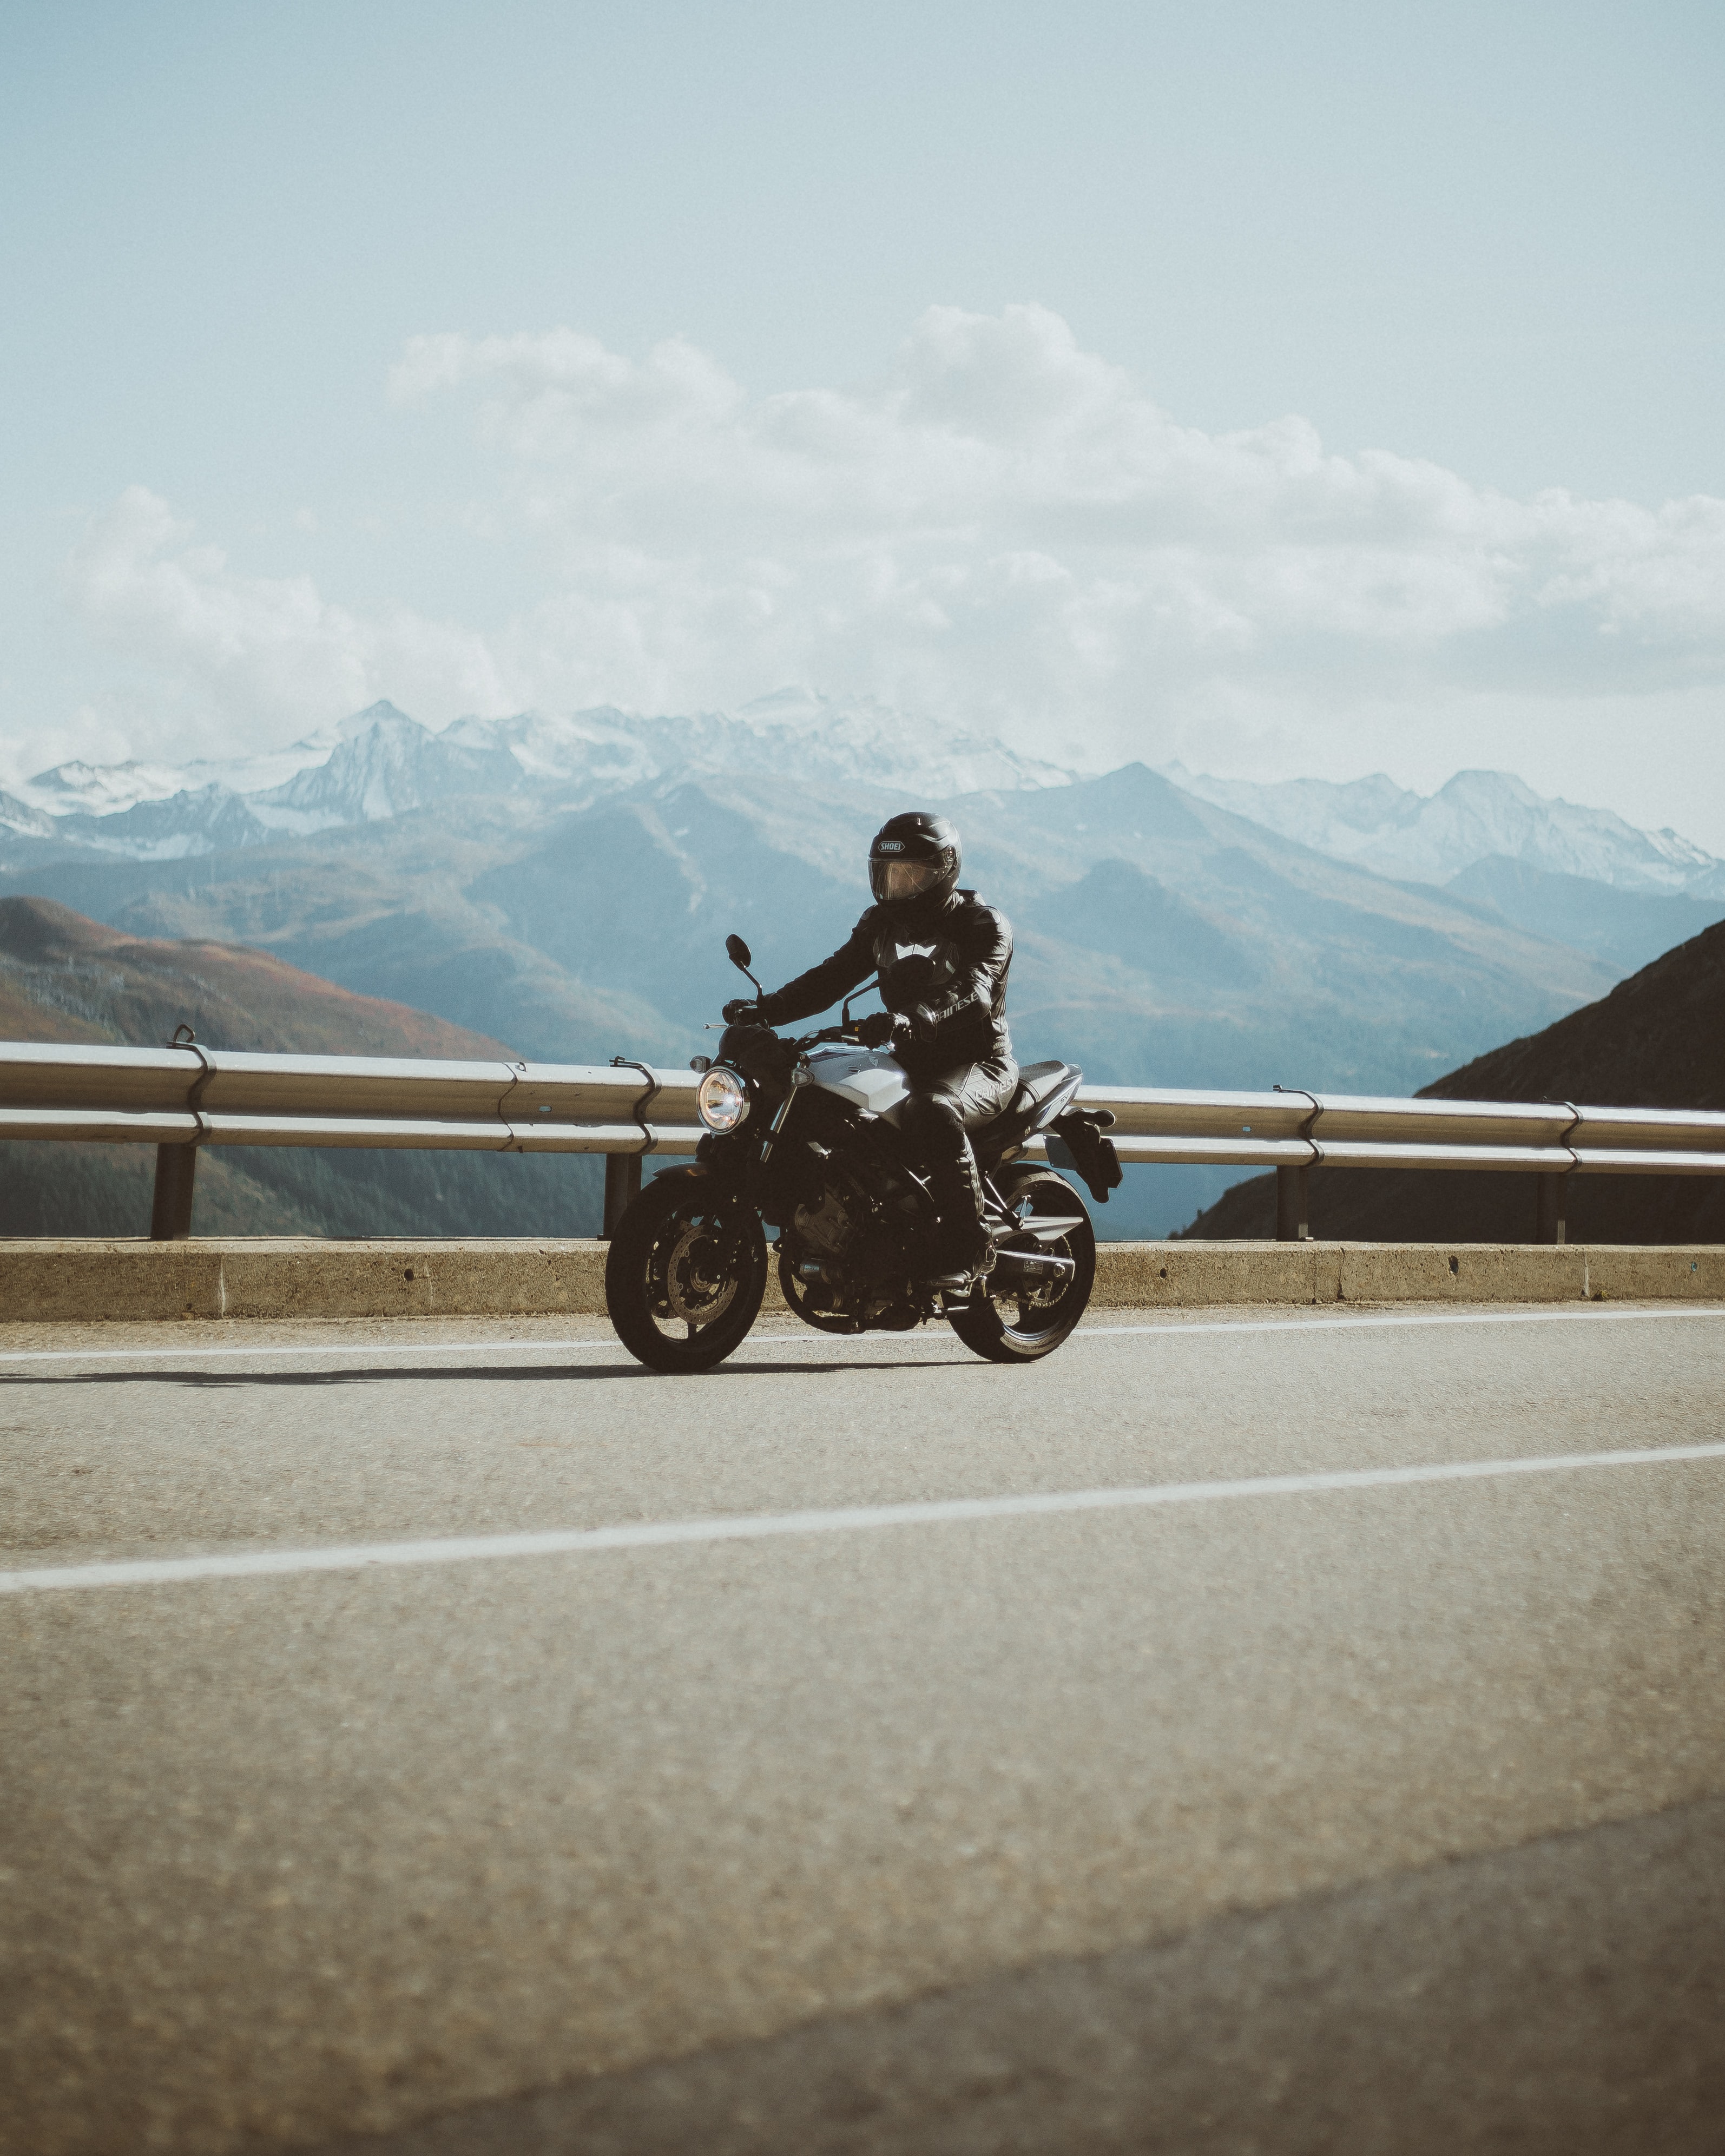 HQ Motorcyclist Background Images